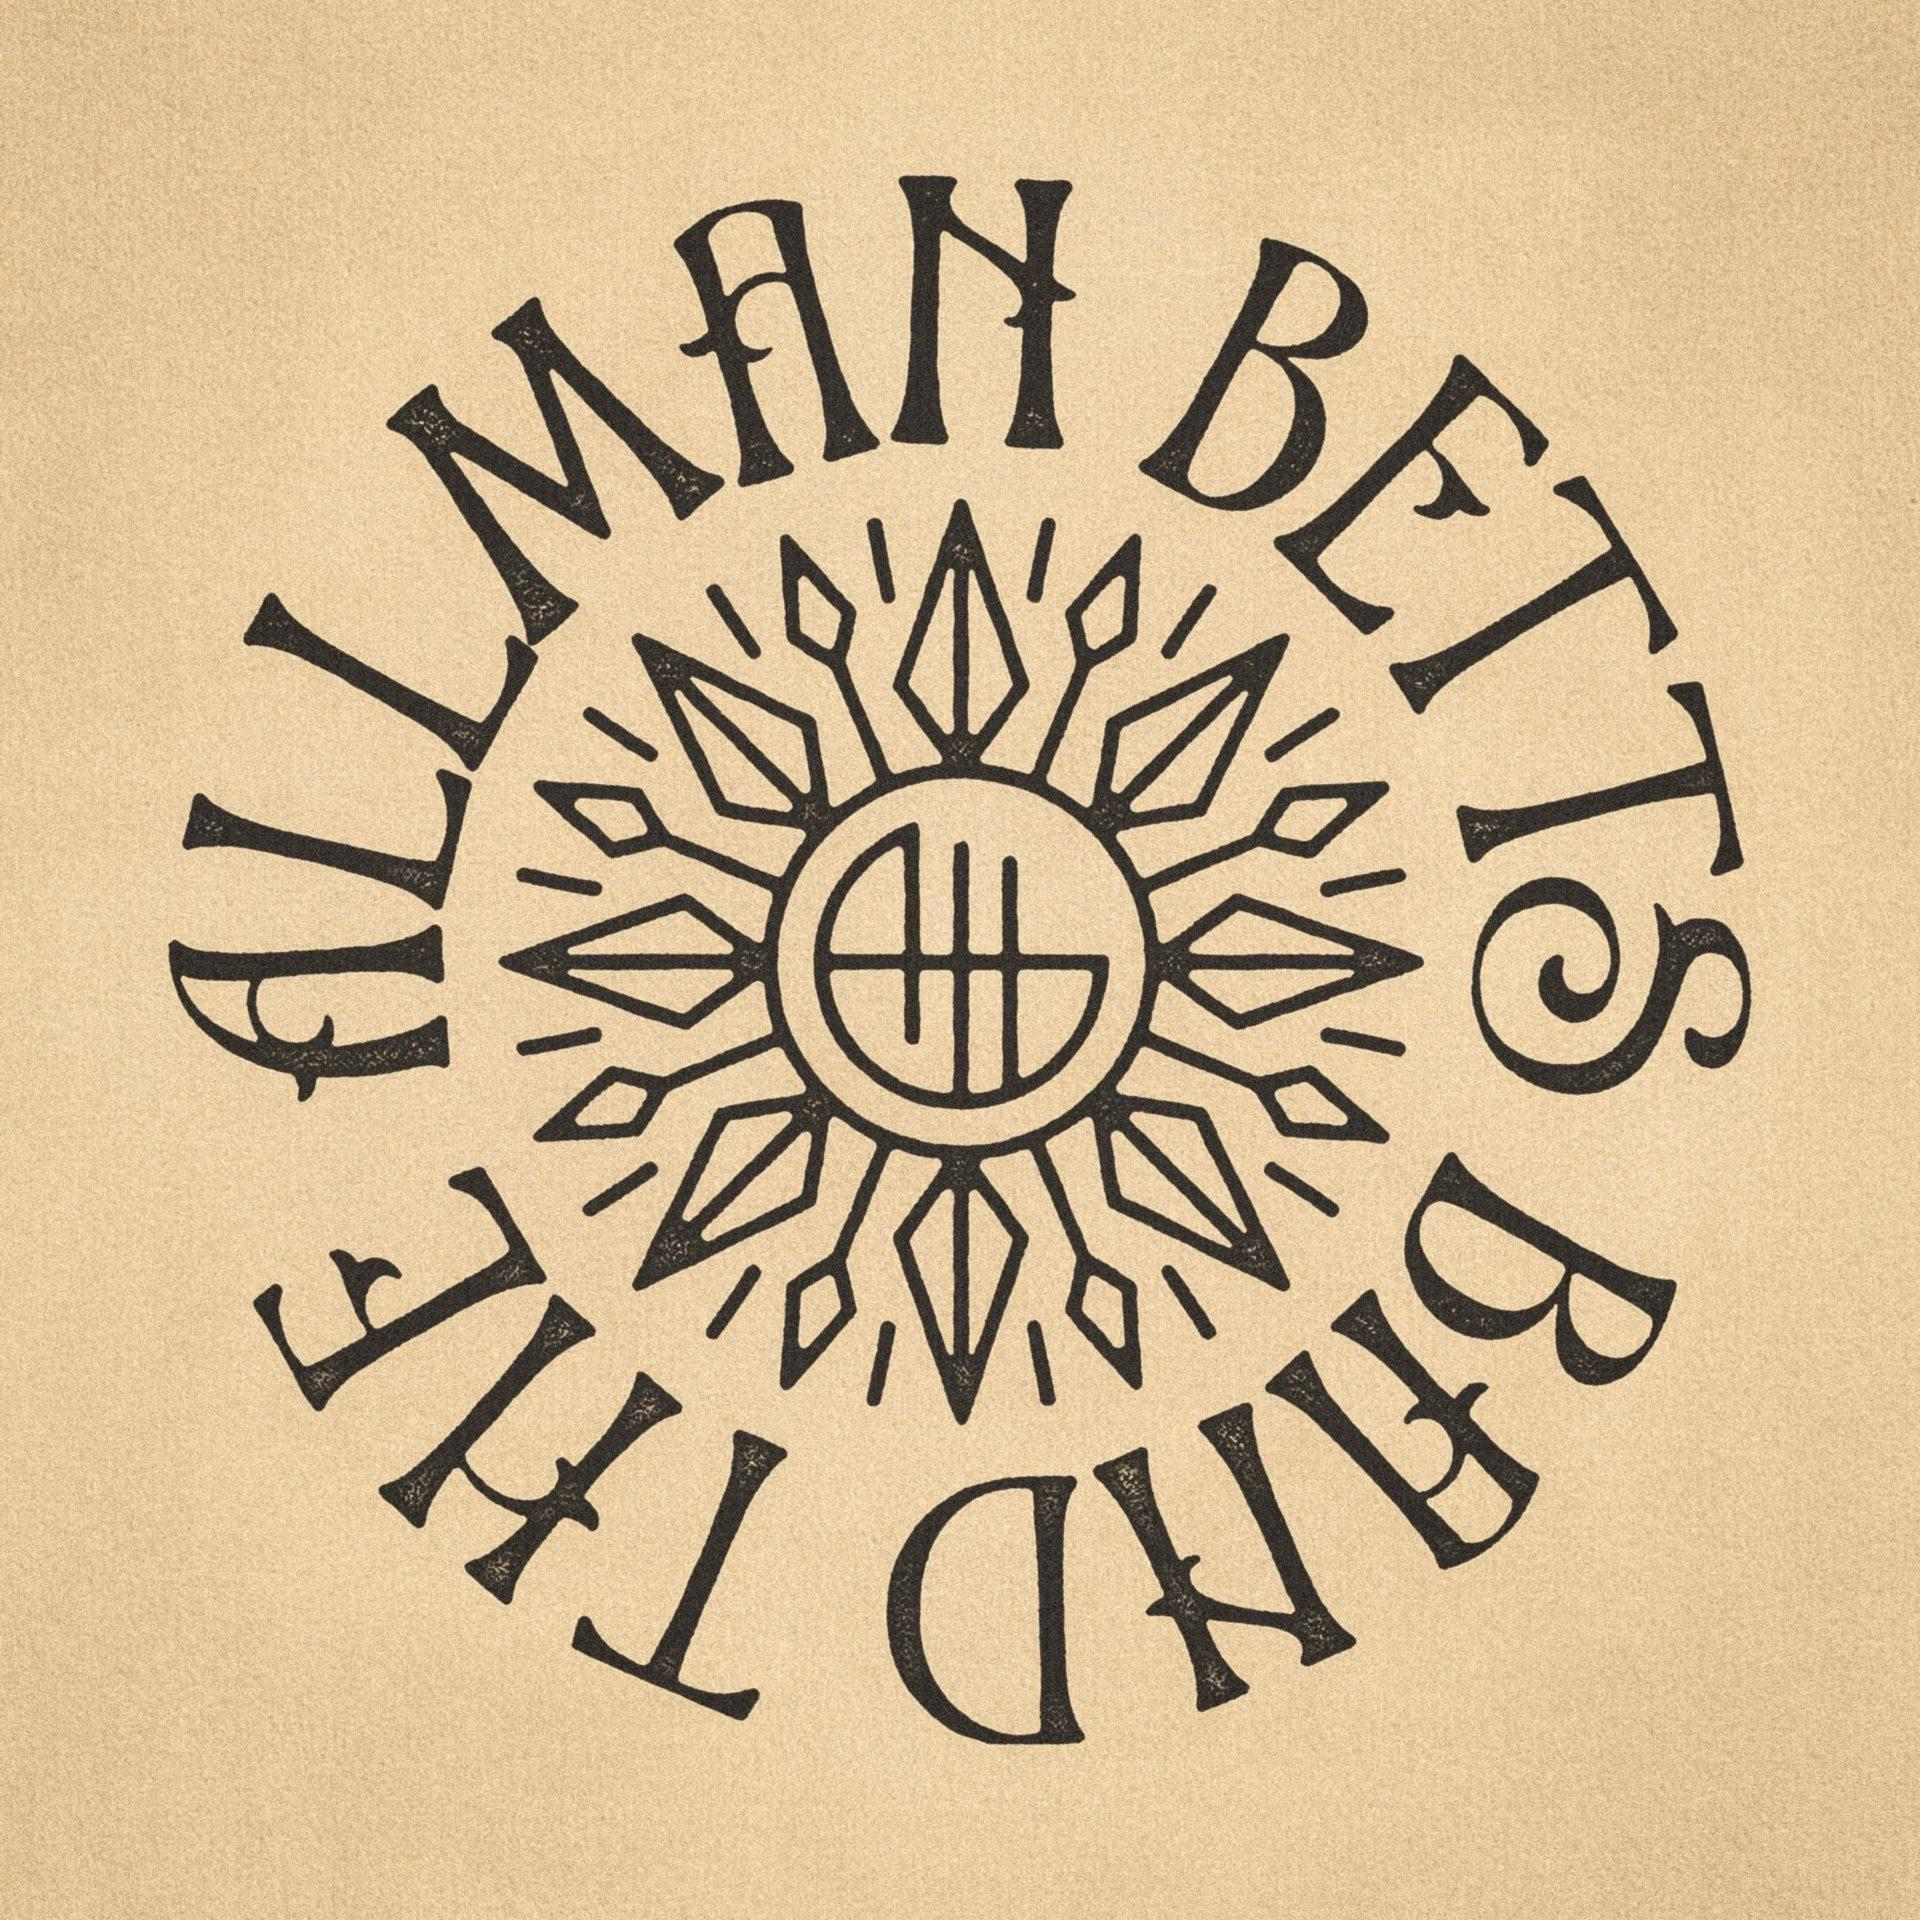 Allman Betts Band (CD) - RIVER TO THE - DOWN